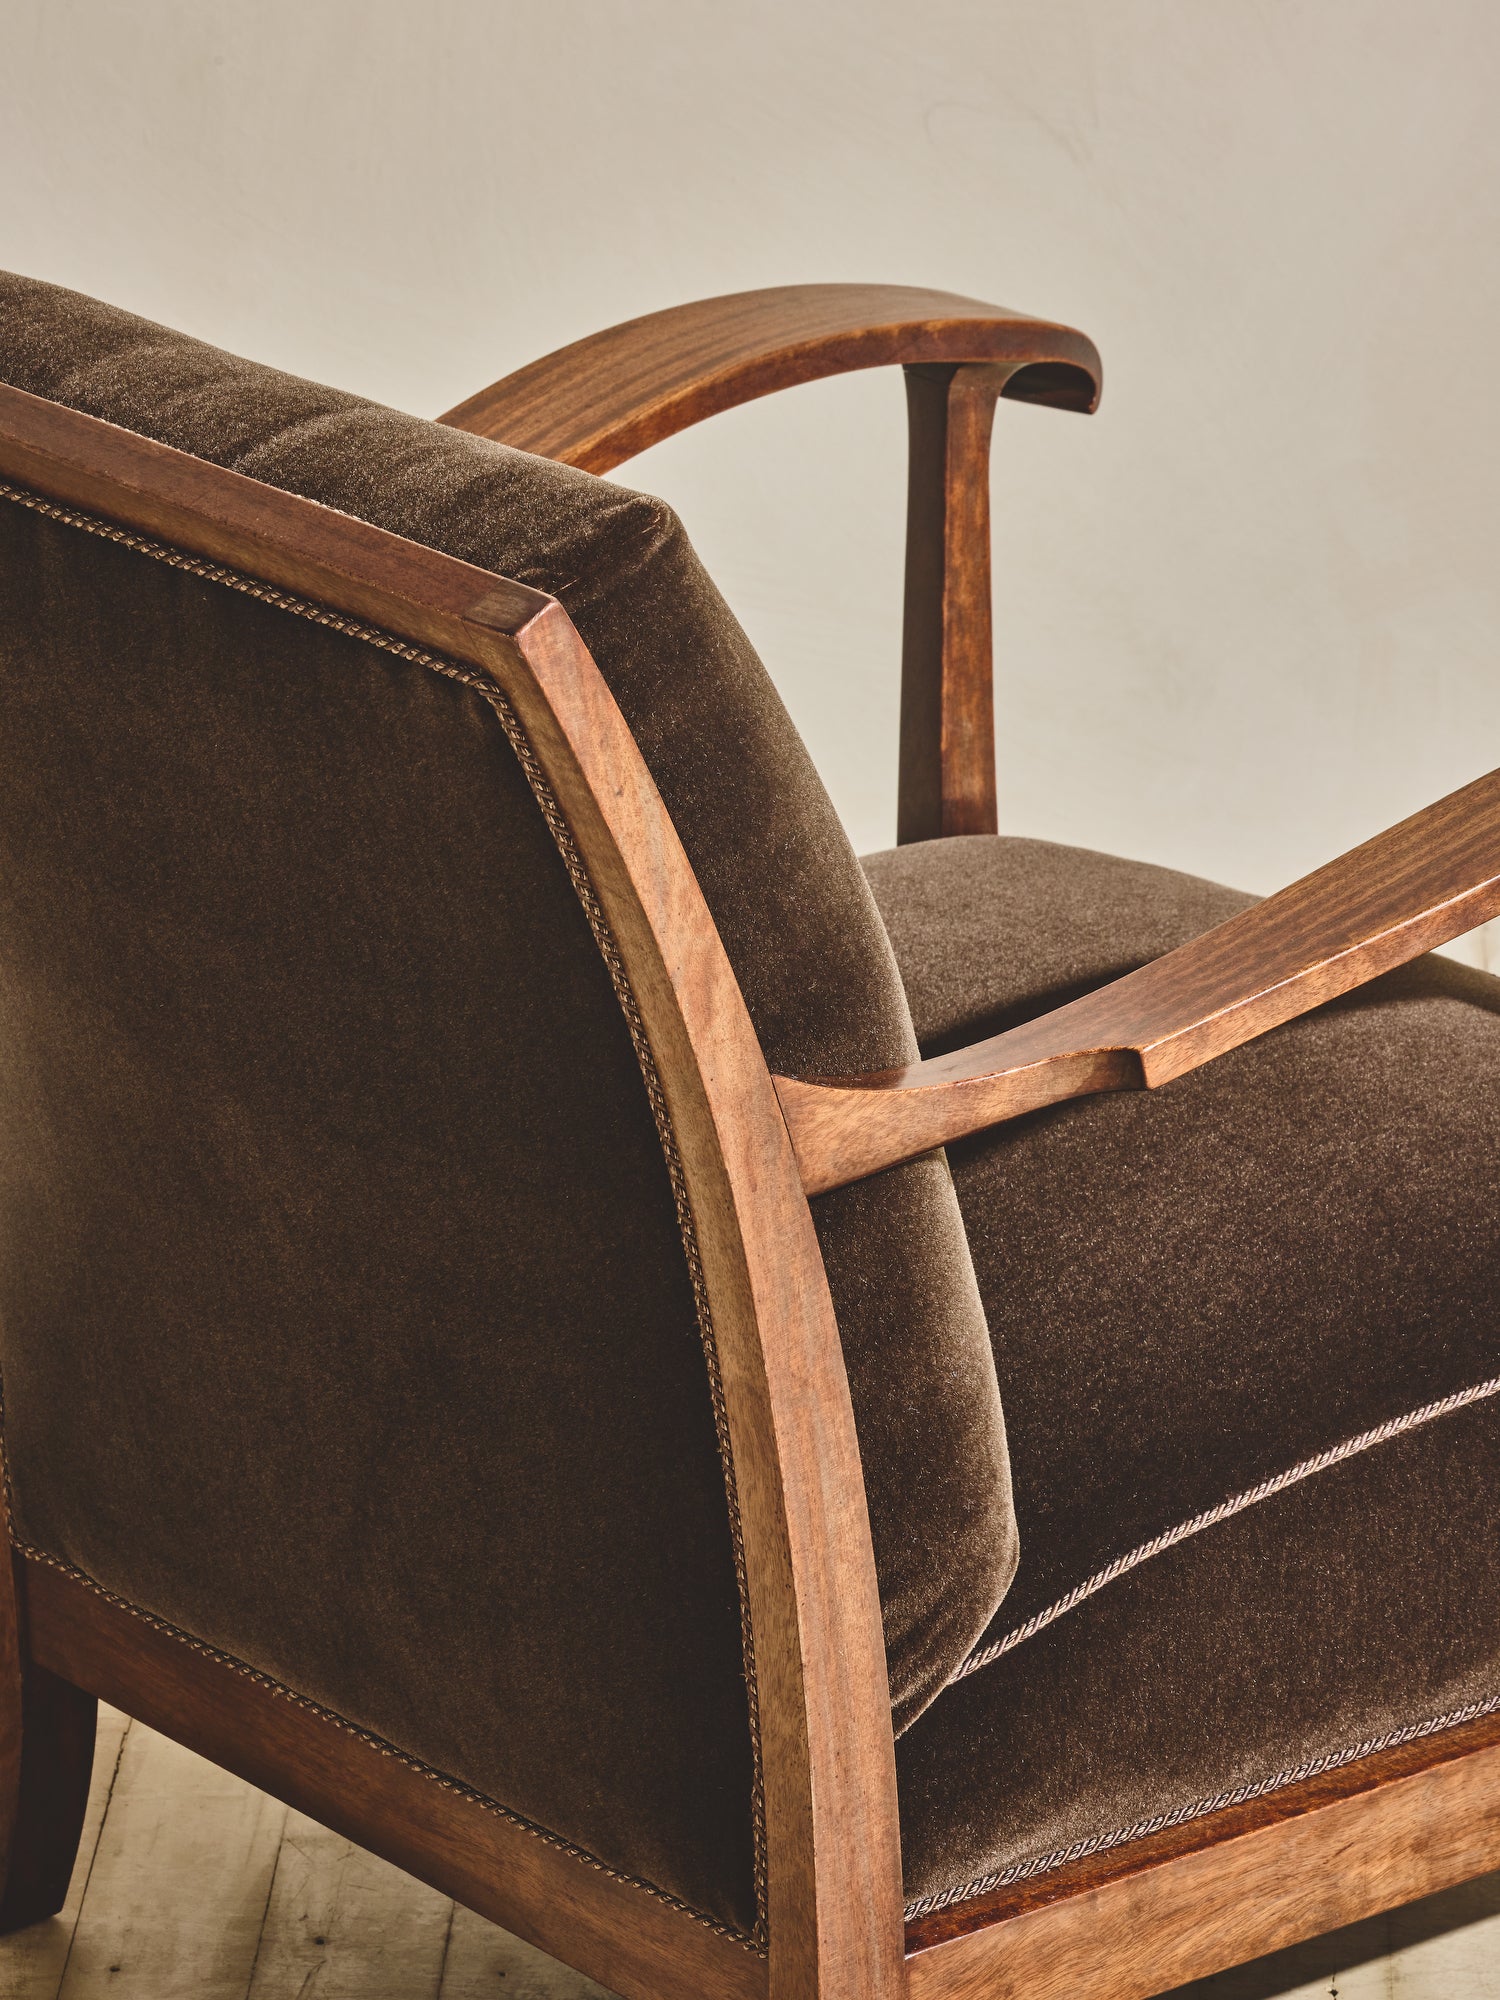 1930's brown Danish art décor armchair with thin curved details.